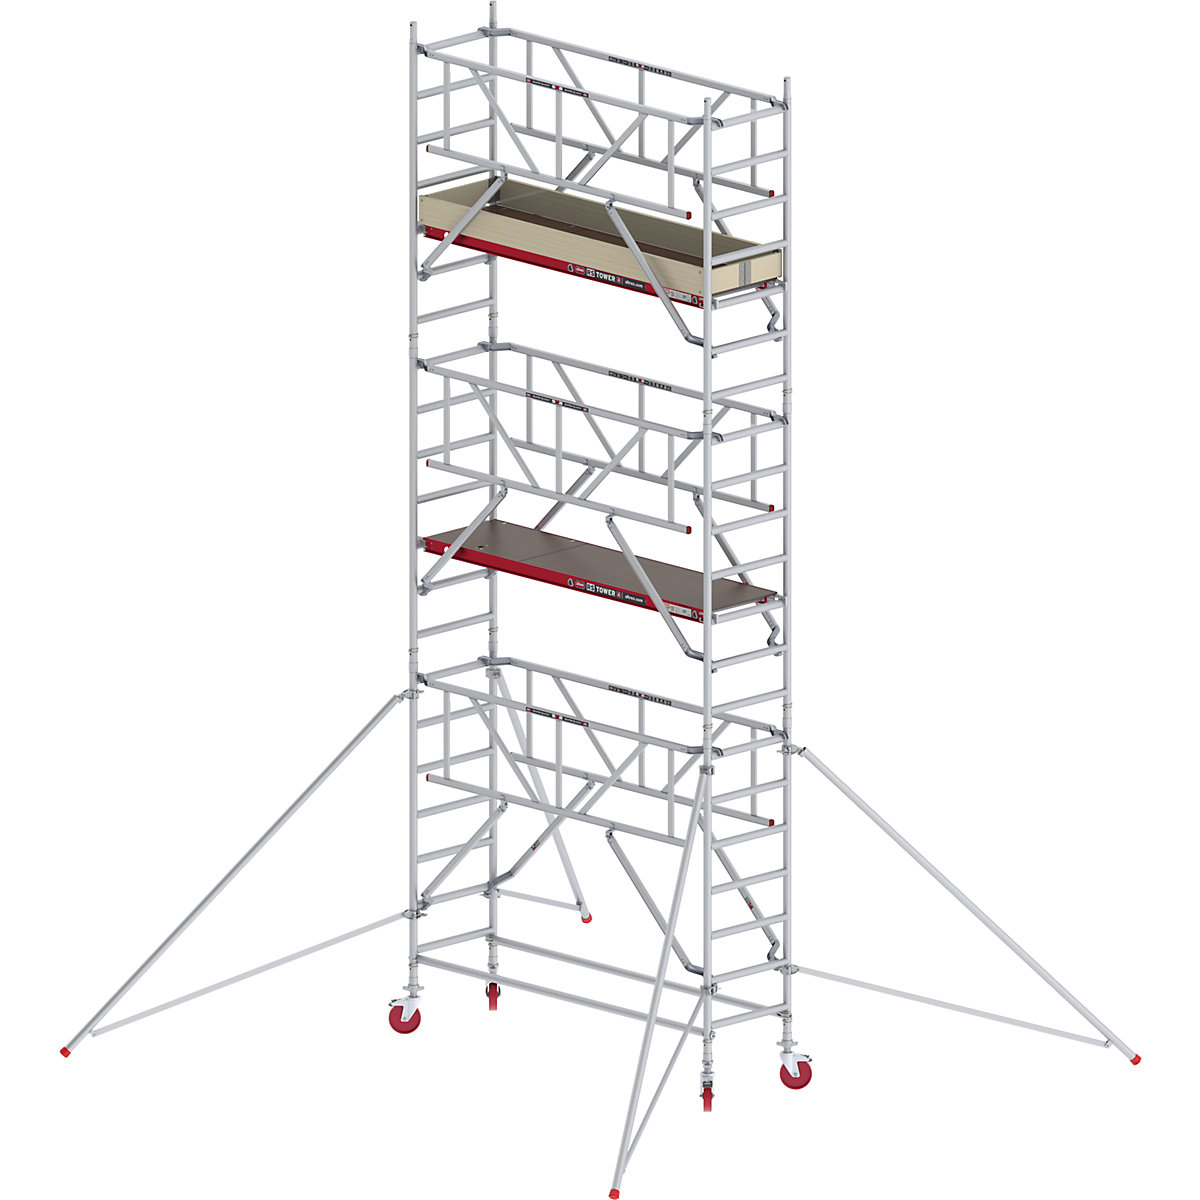 RS TOWER 41 slim mobile access tower with Safe-Quick® – Altrex, wooden platform, length 2.45 m, working height 7.20 m-3